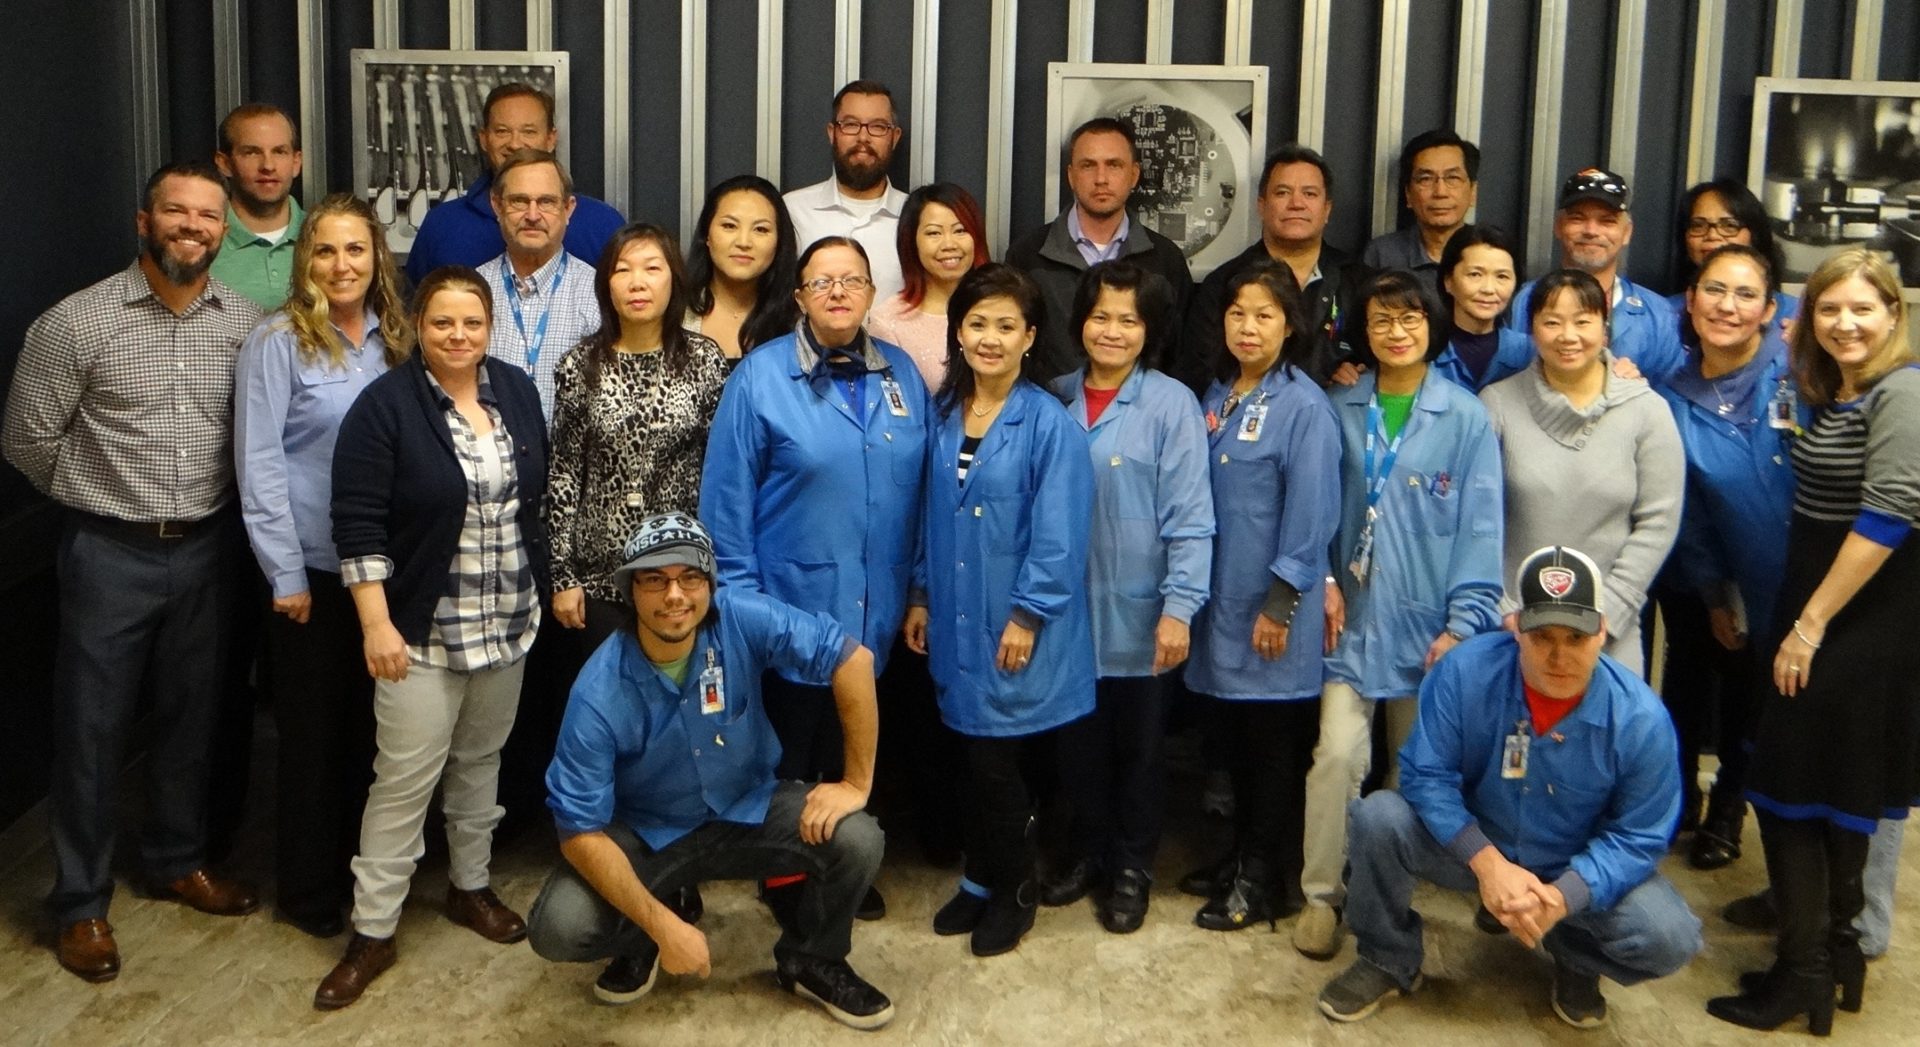 group photo of Advanced Assembly employees in blue jackets